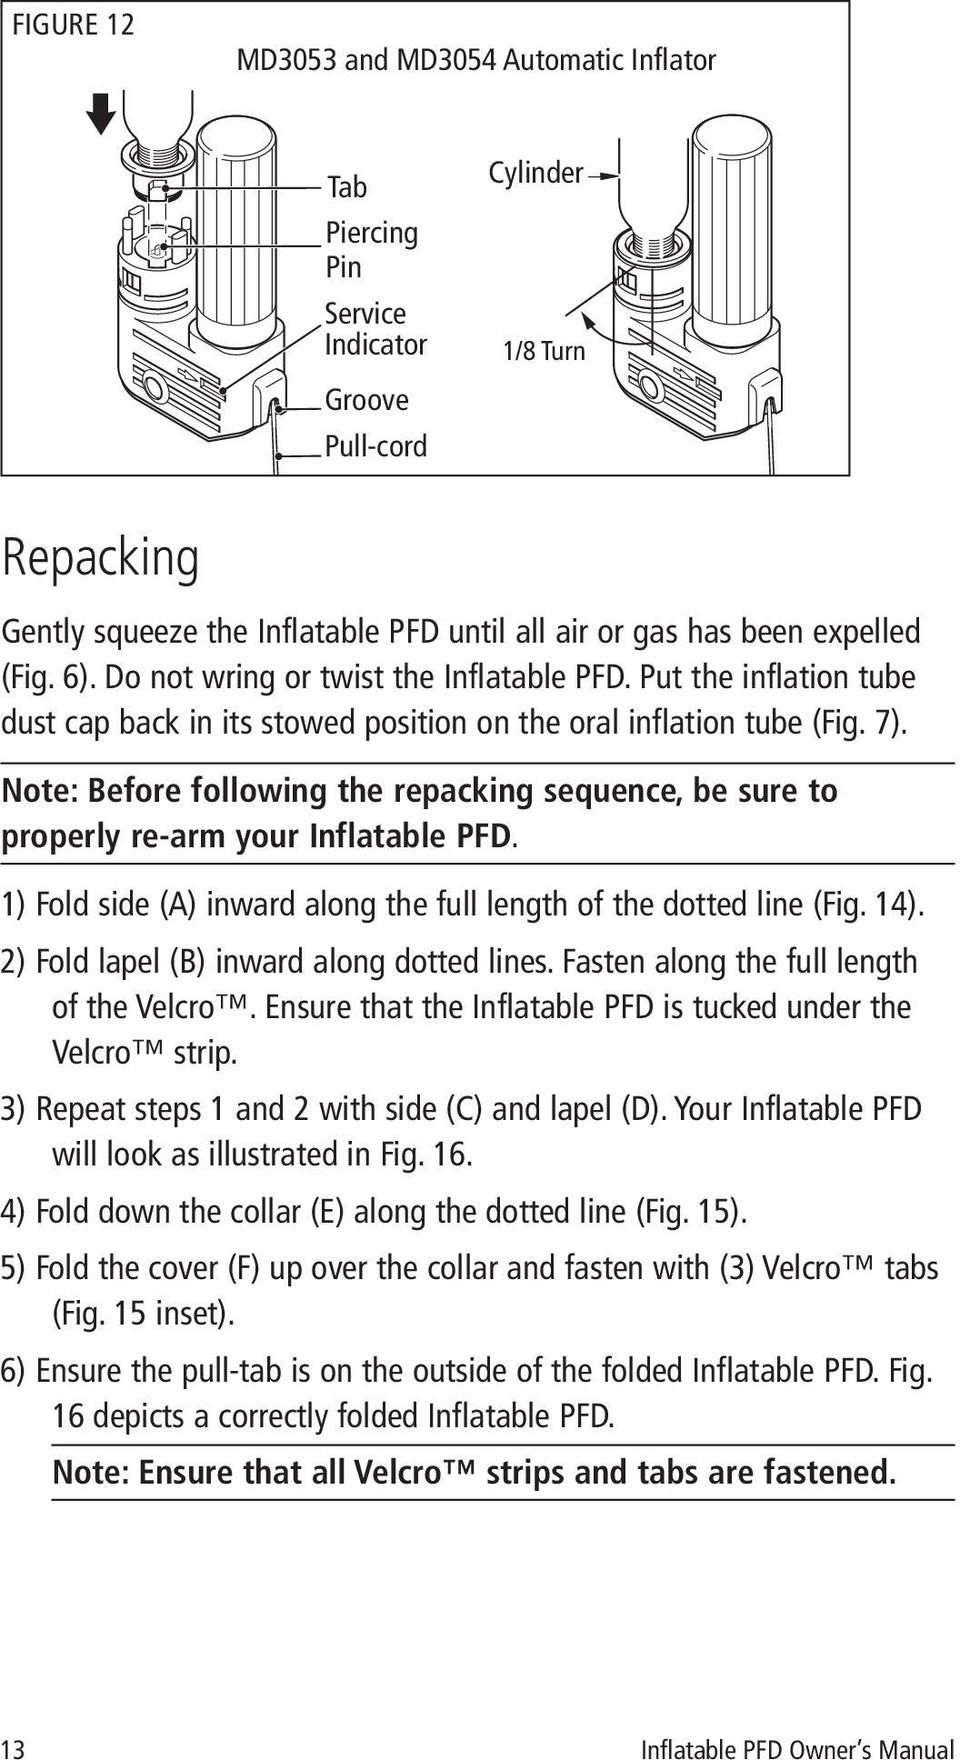 Note: Before following the repacking sequence, be sure to properly re-arm your Inflatable PFD. 1) Fold side (A) inward along the full length of the dotted line (Fig. 14).